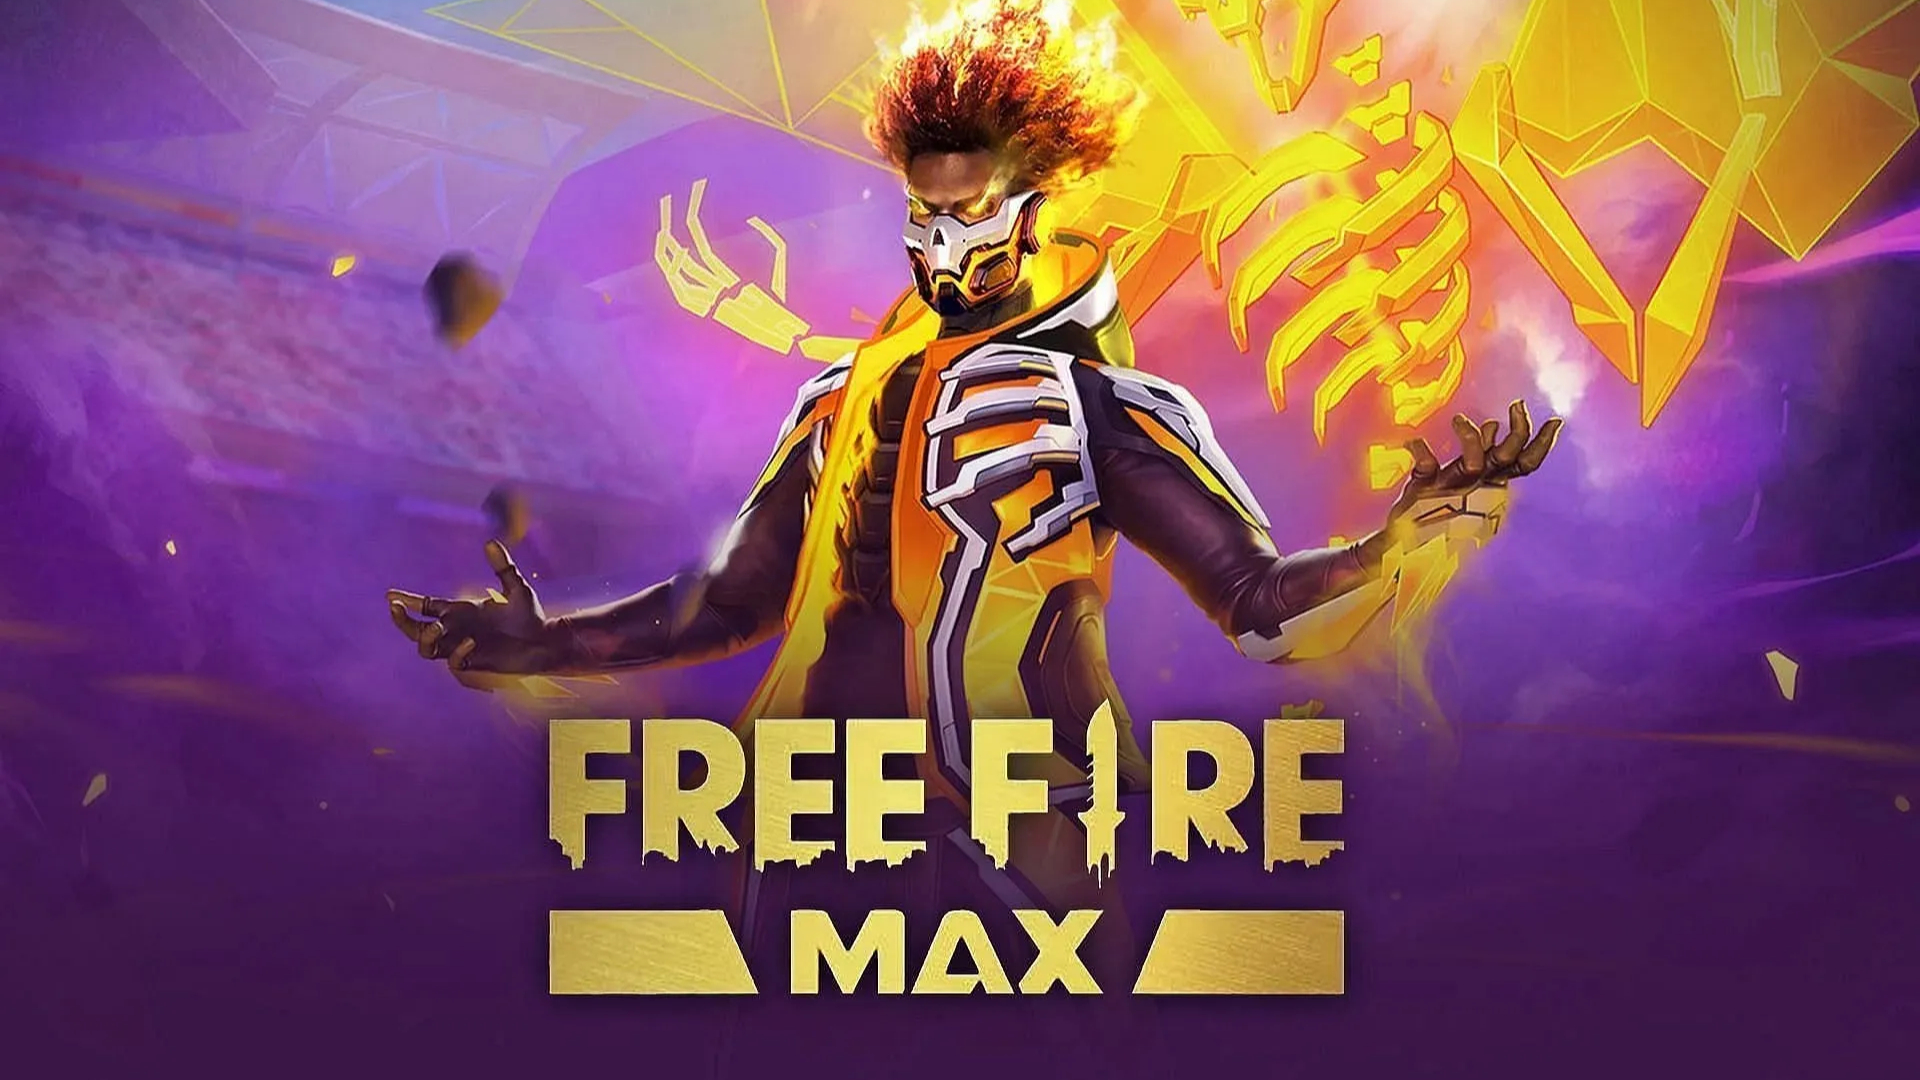 Free Fire Max The Ultimate Battle Royale Experience On Mobile